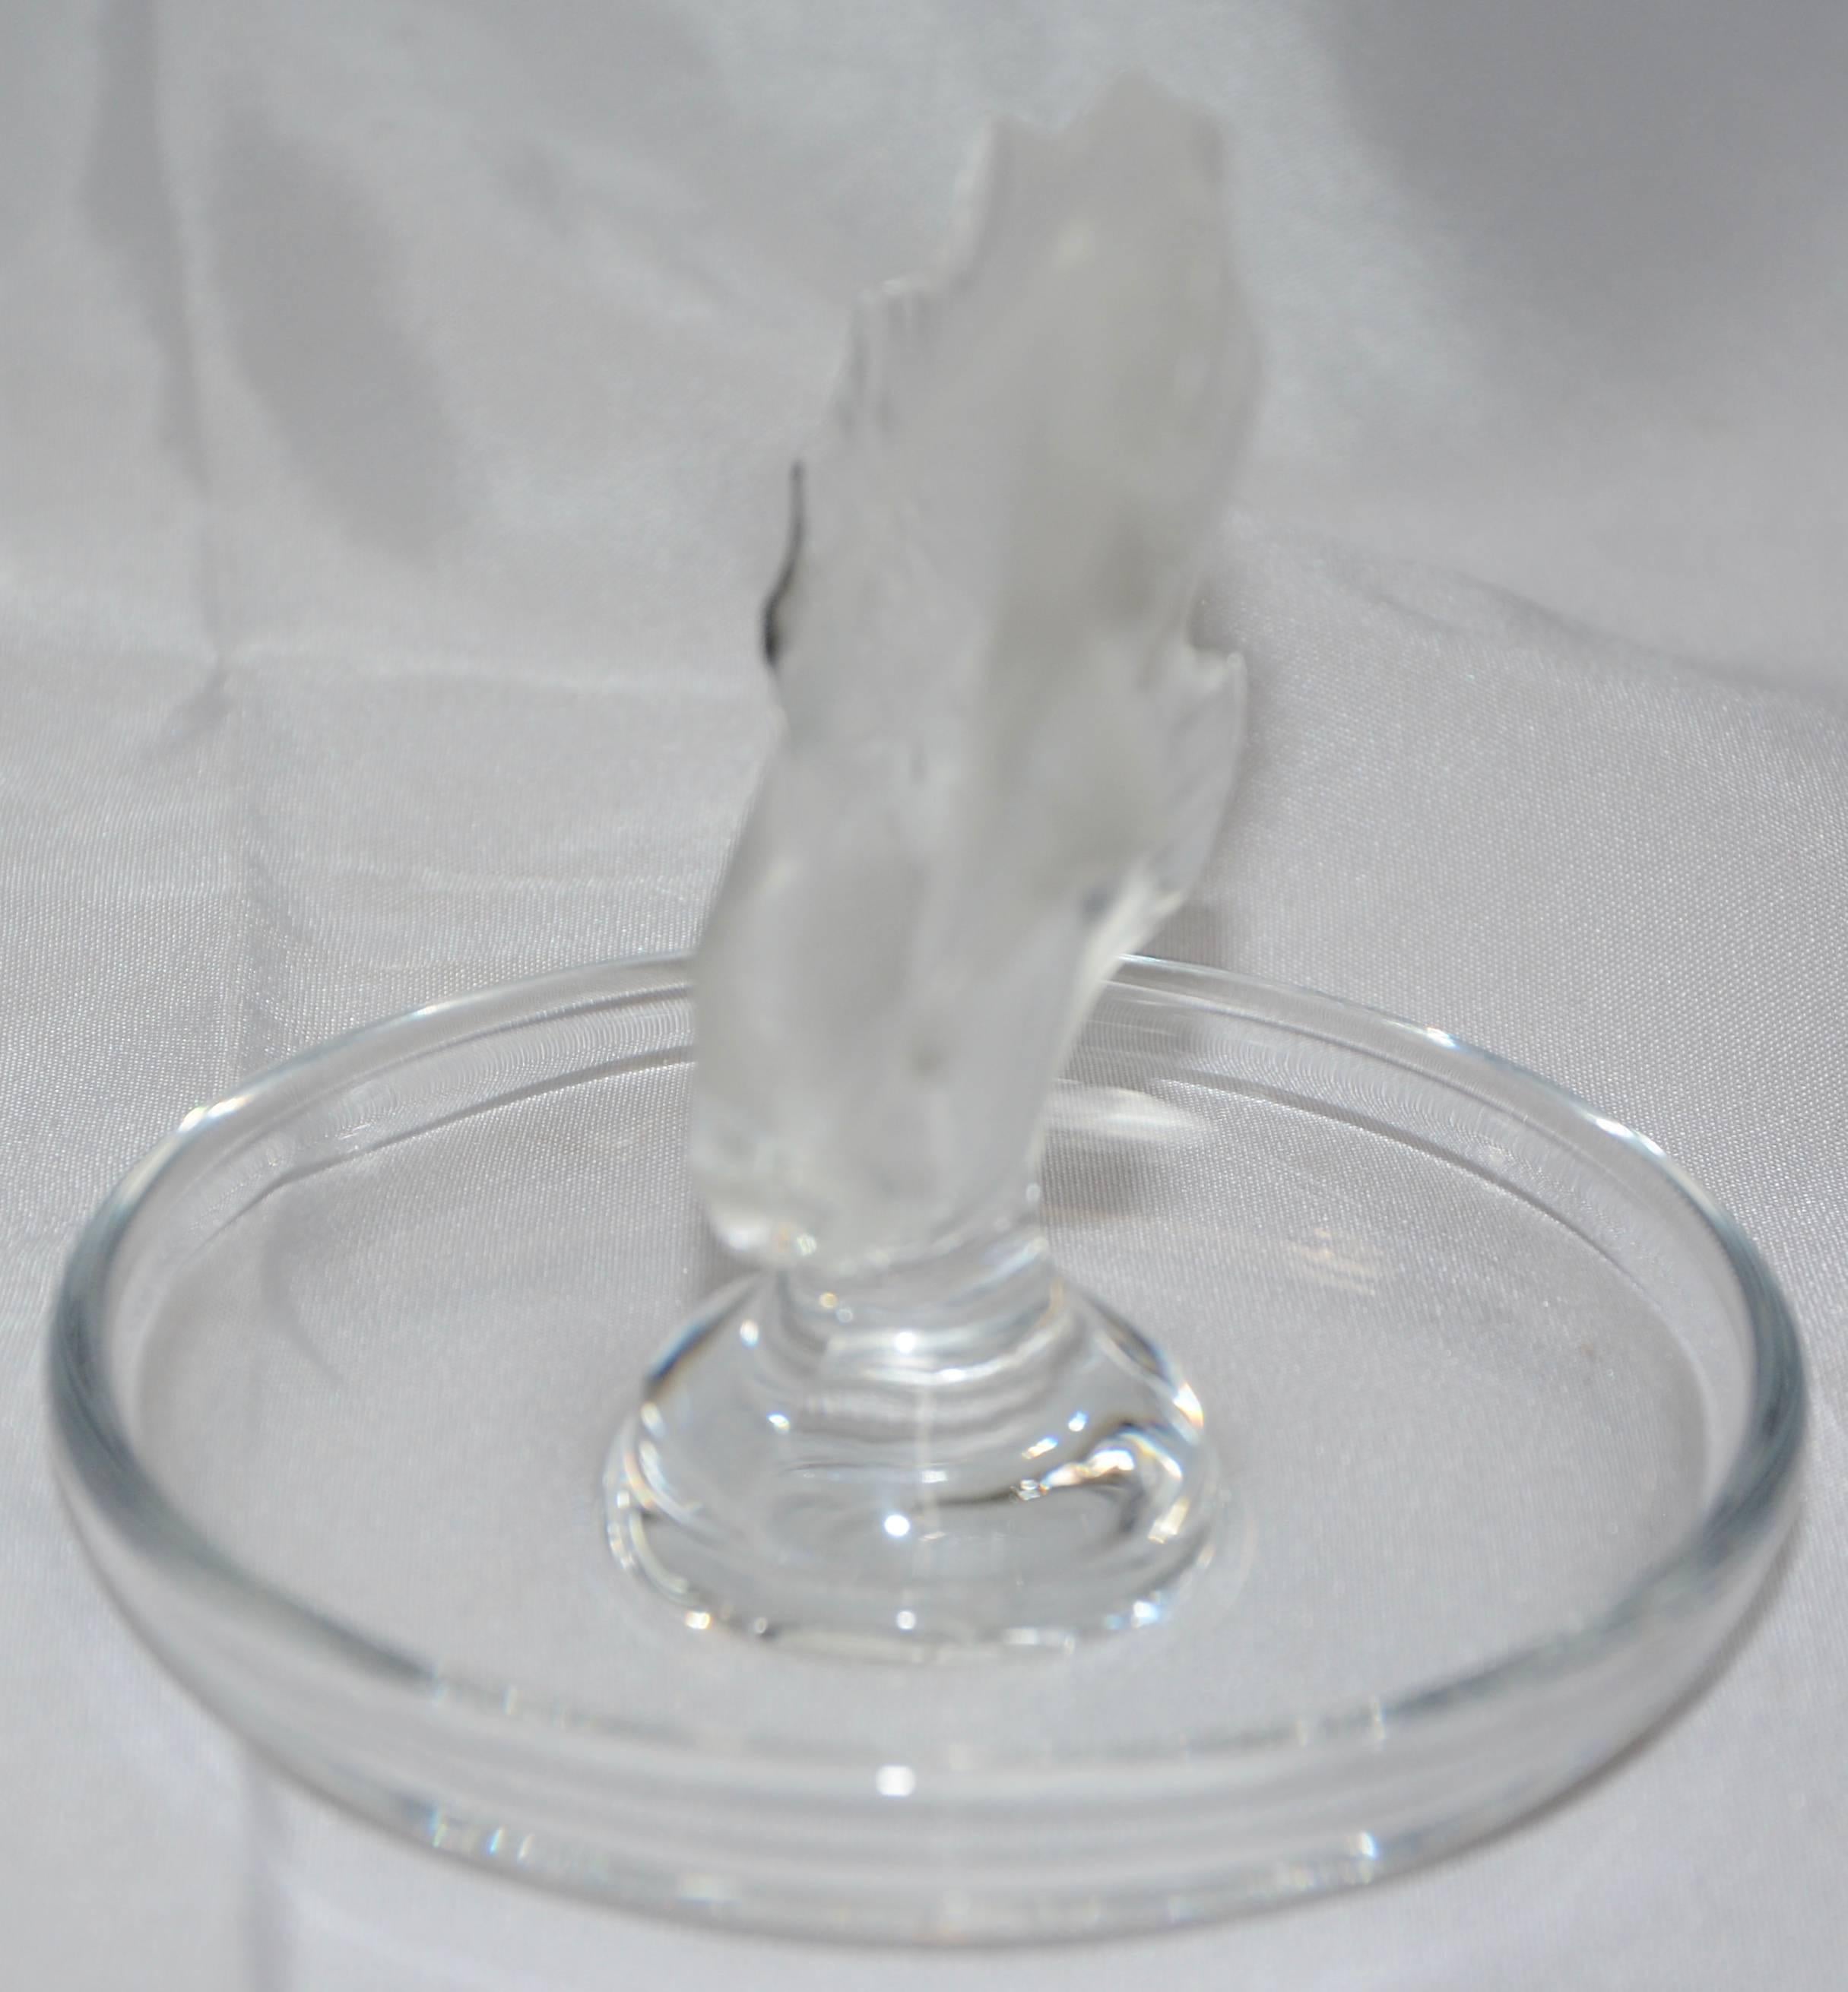 We are offering a Lalique of France Koi fish finished in their well-known satin glass. He is jumping from a clear crystal ring dish. The piece is signed in cursive on the bottom.